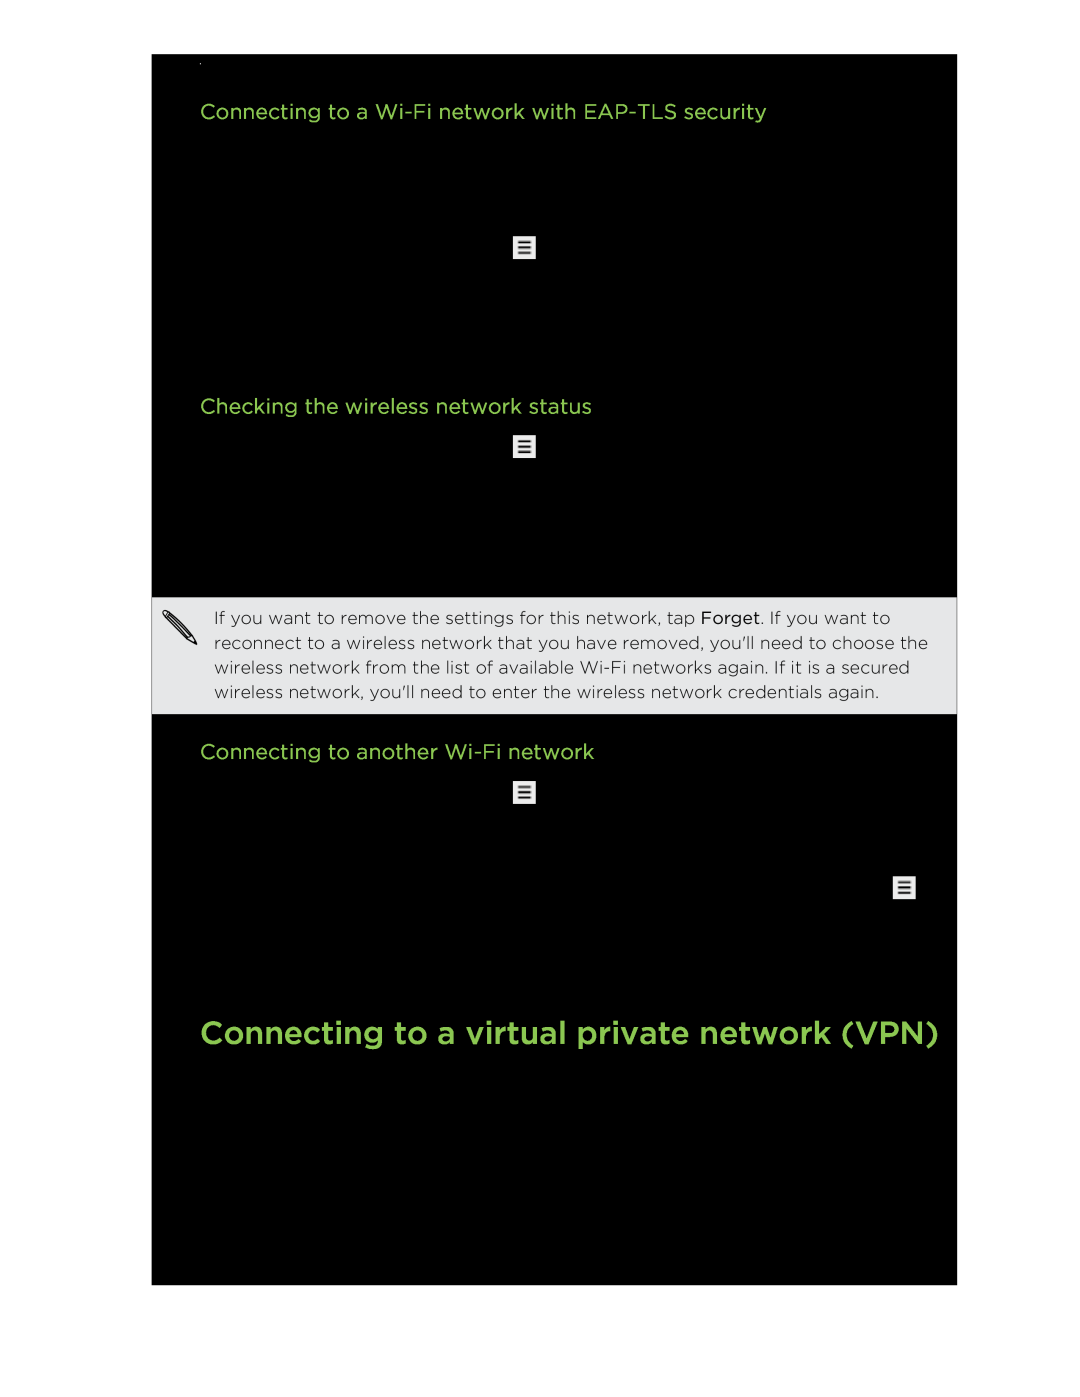 HTC manual Connecting to a virtual private network VPN, Connecting to a Wi-Fi network with EAP-TLS security 